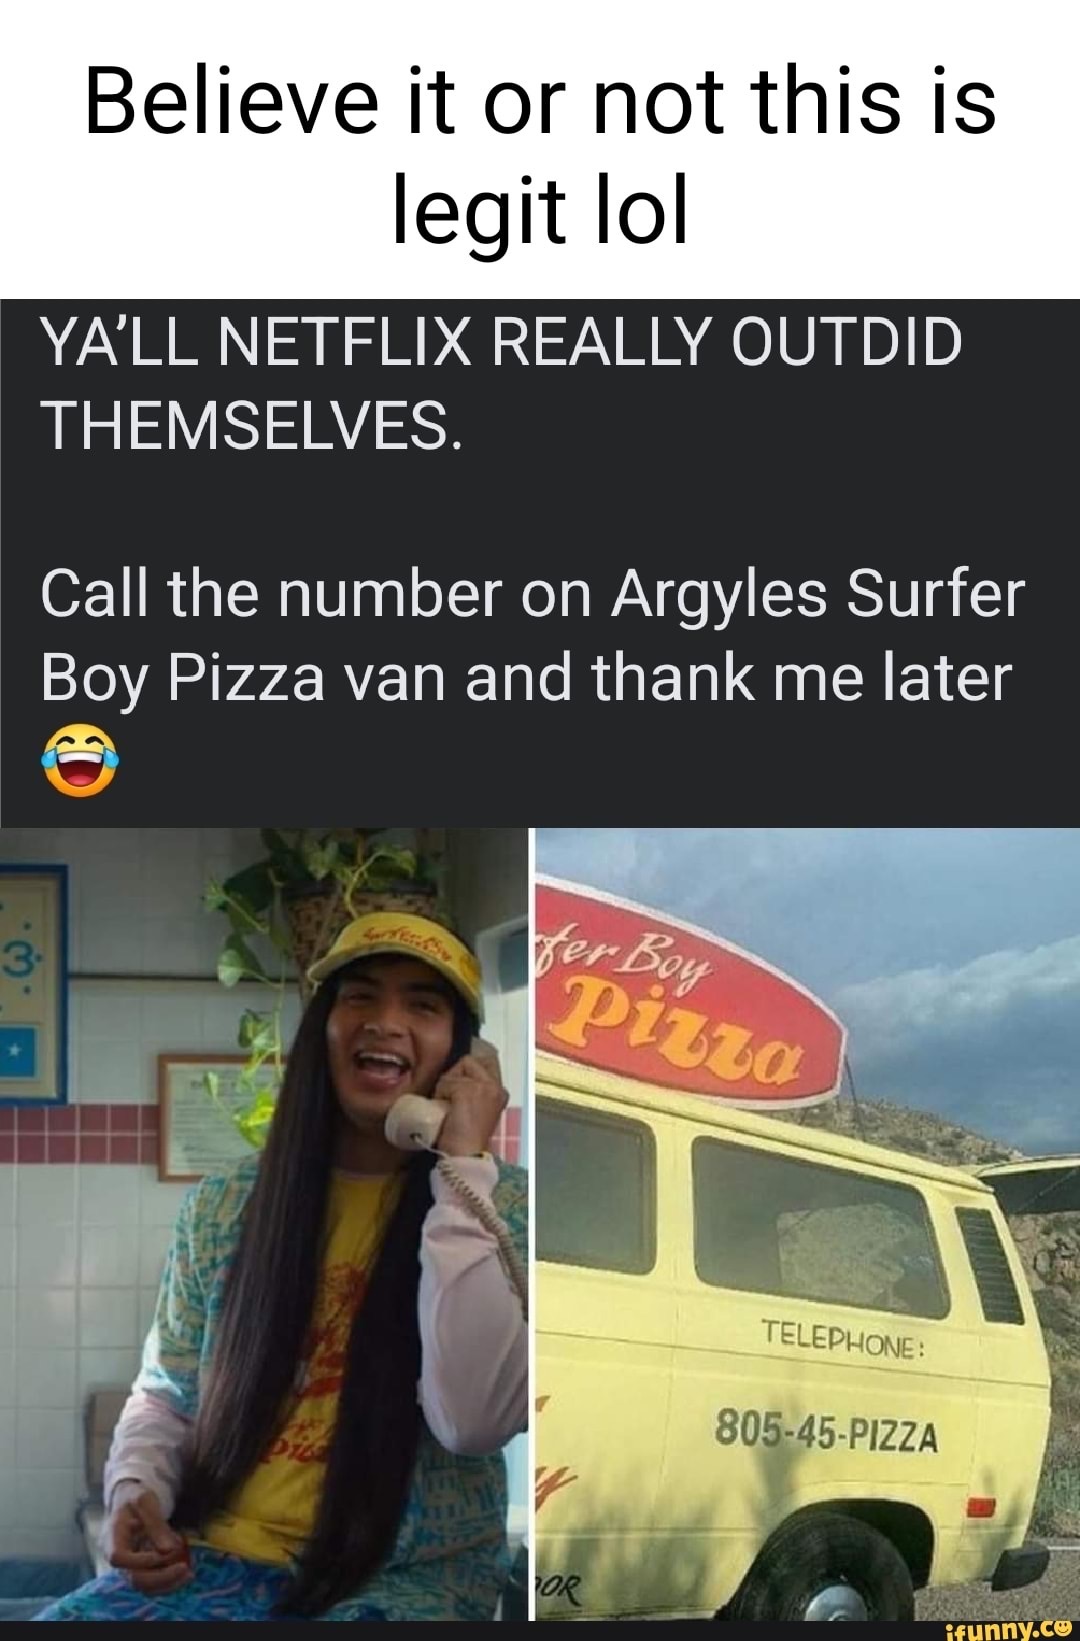 Stranger Things' fans: Call the Surfer Boy Pizza number for a fun surprise